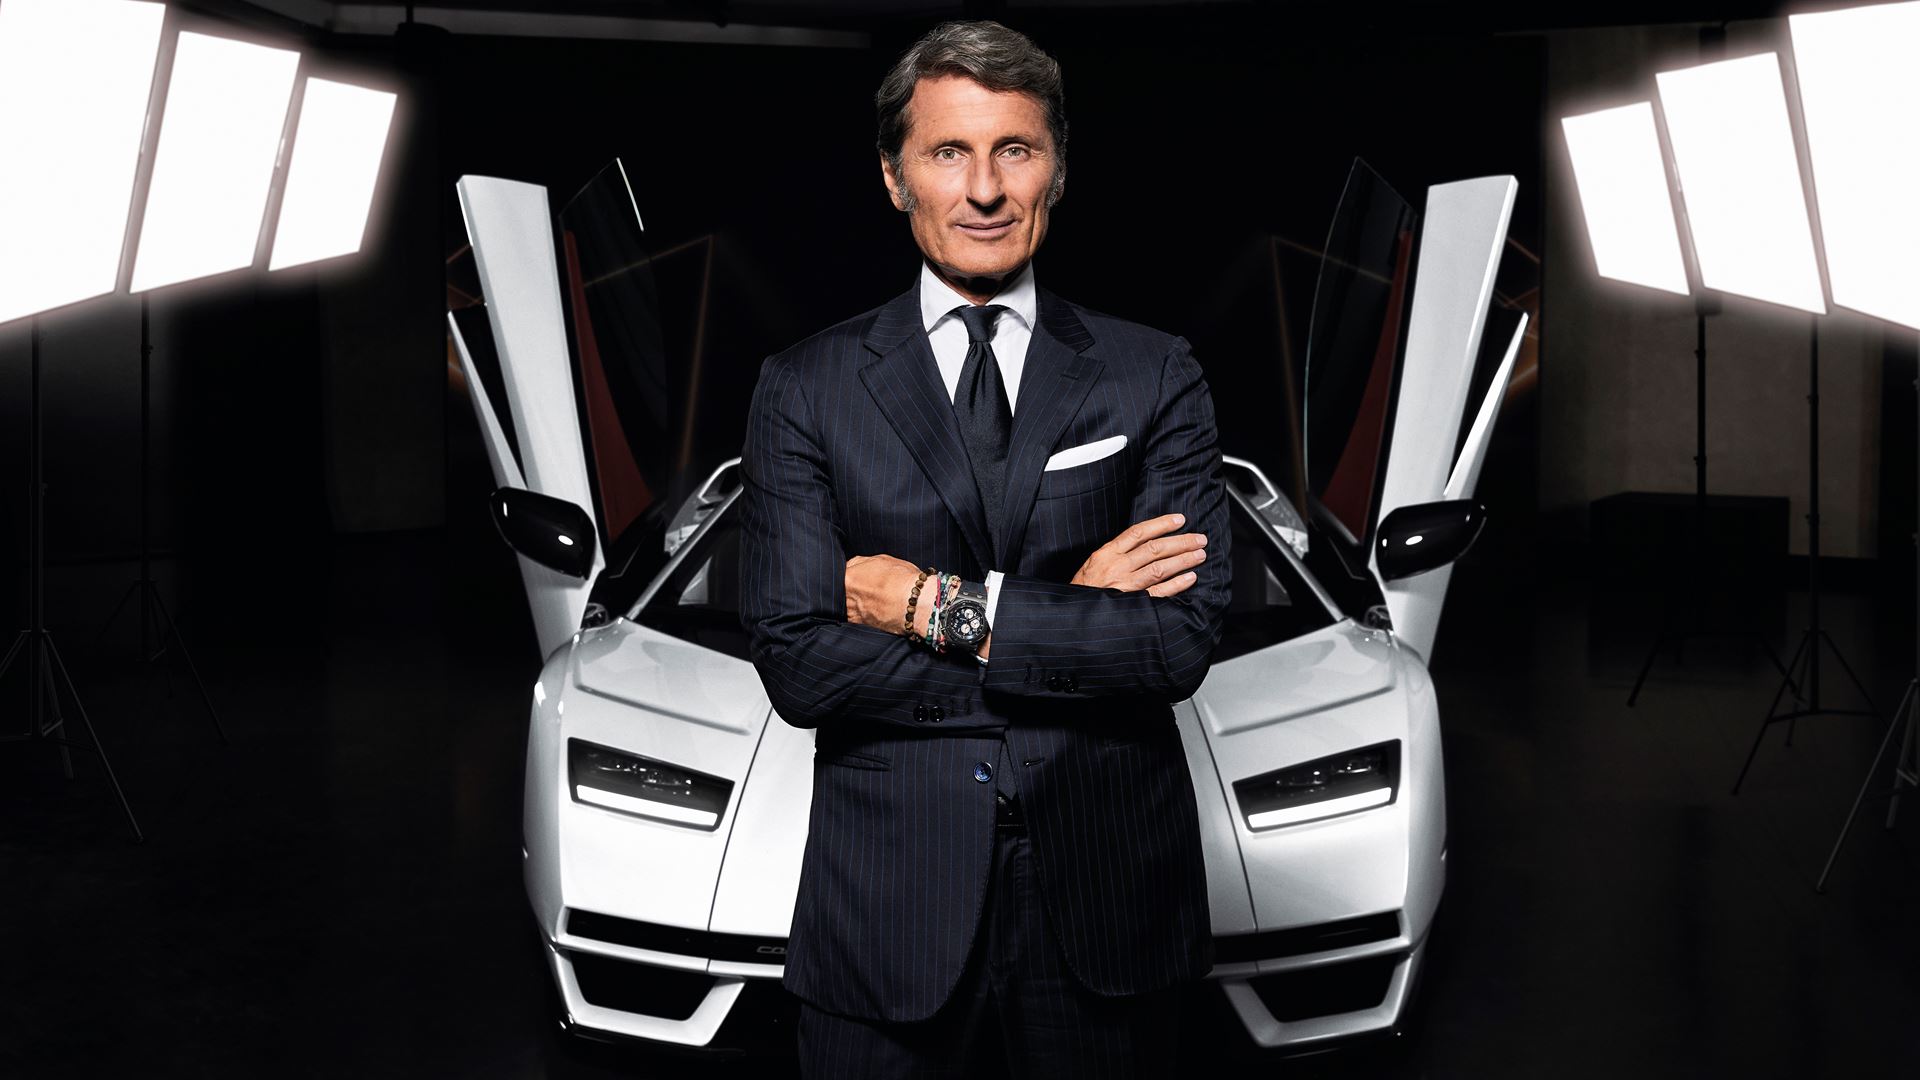 A record-breaking 2021 for Automobili Lamborghini - The company recorded its best year ever, with 8,405 cars delivered - Image 3